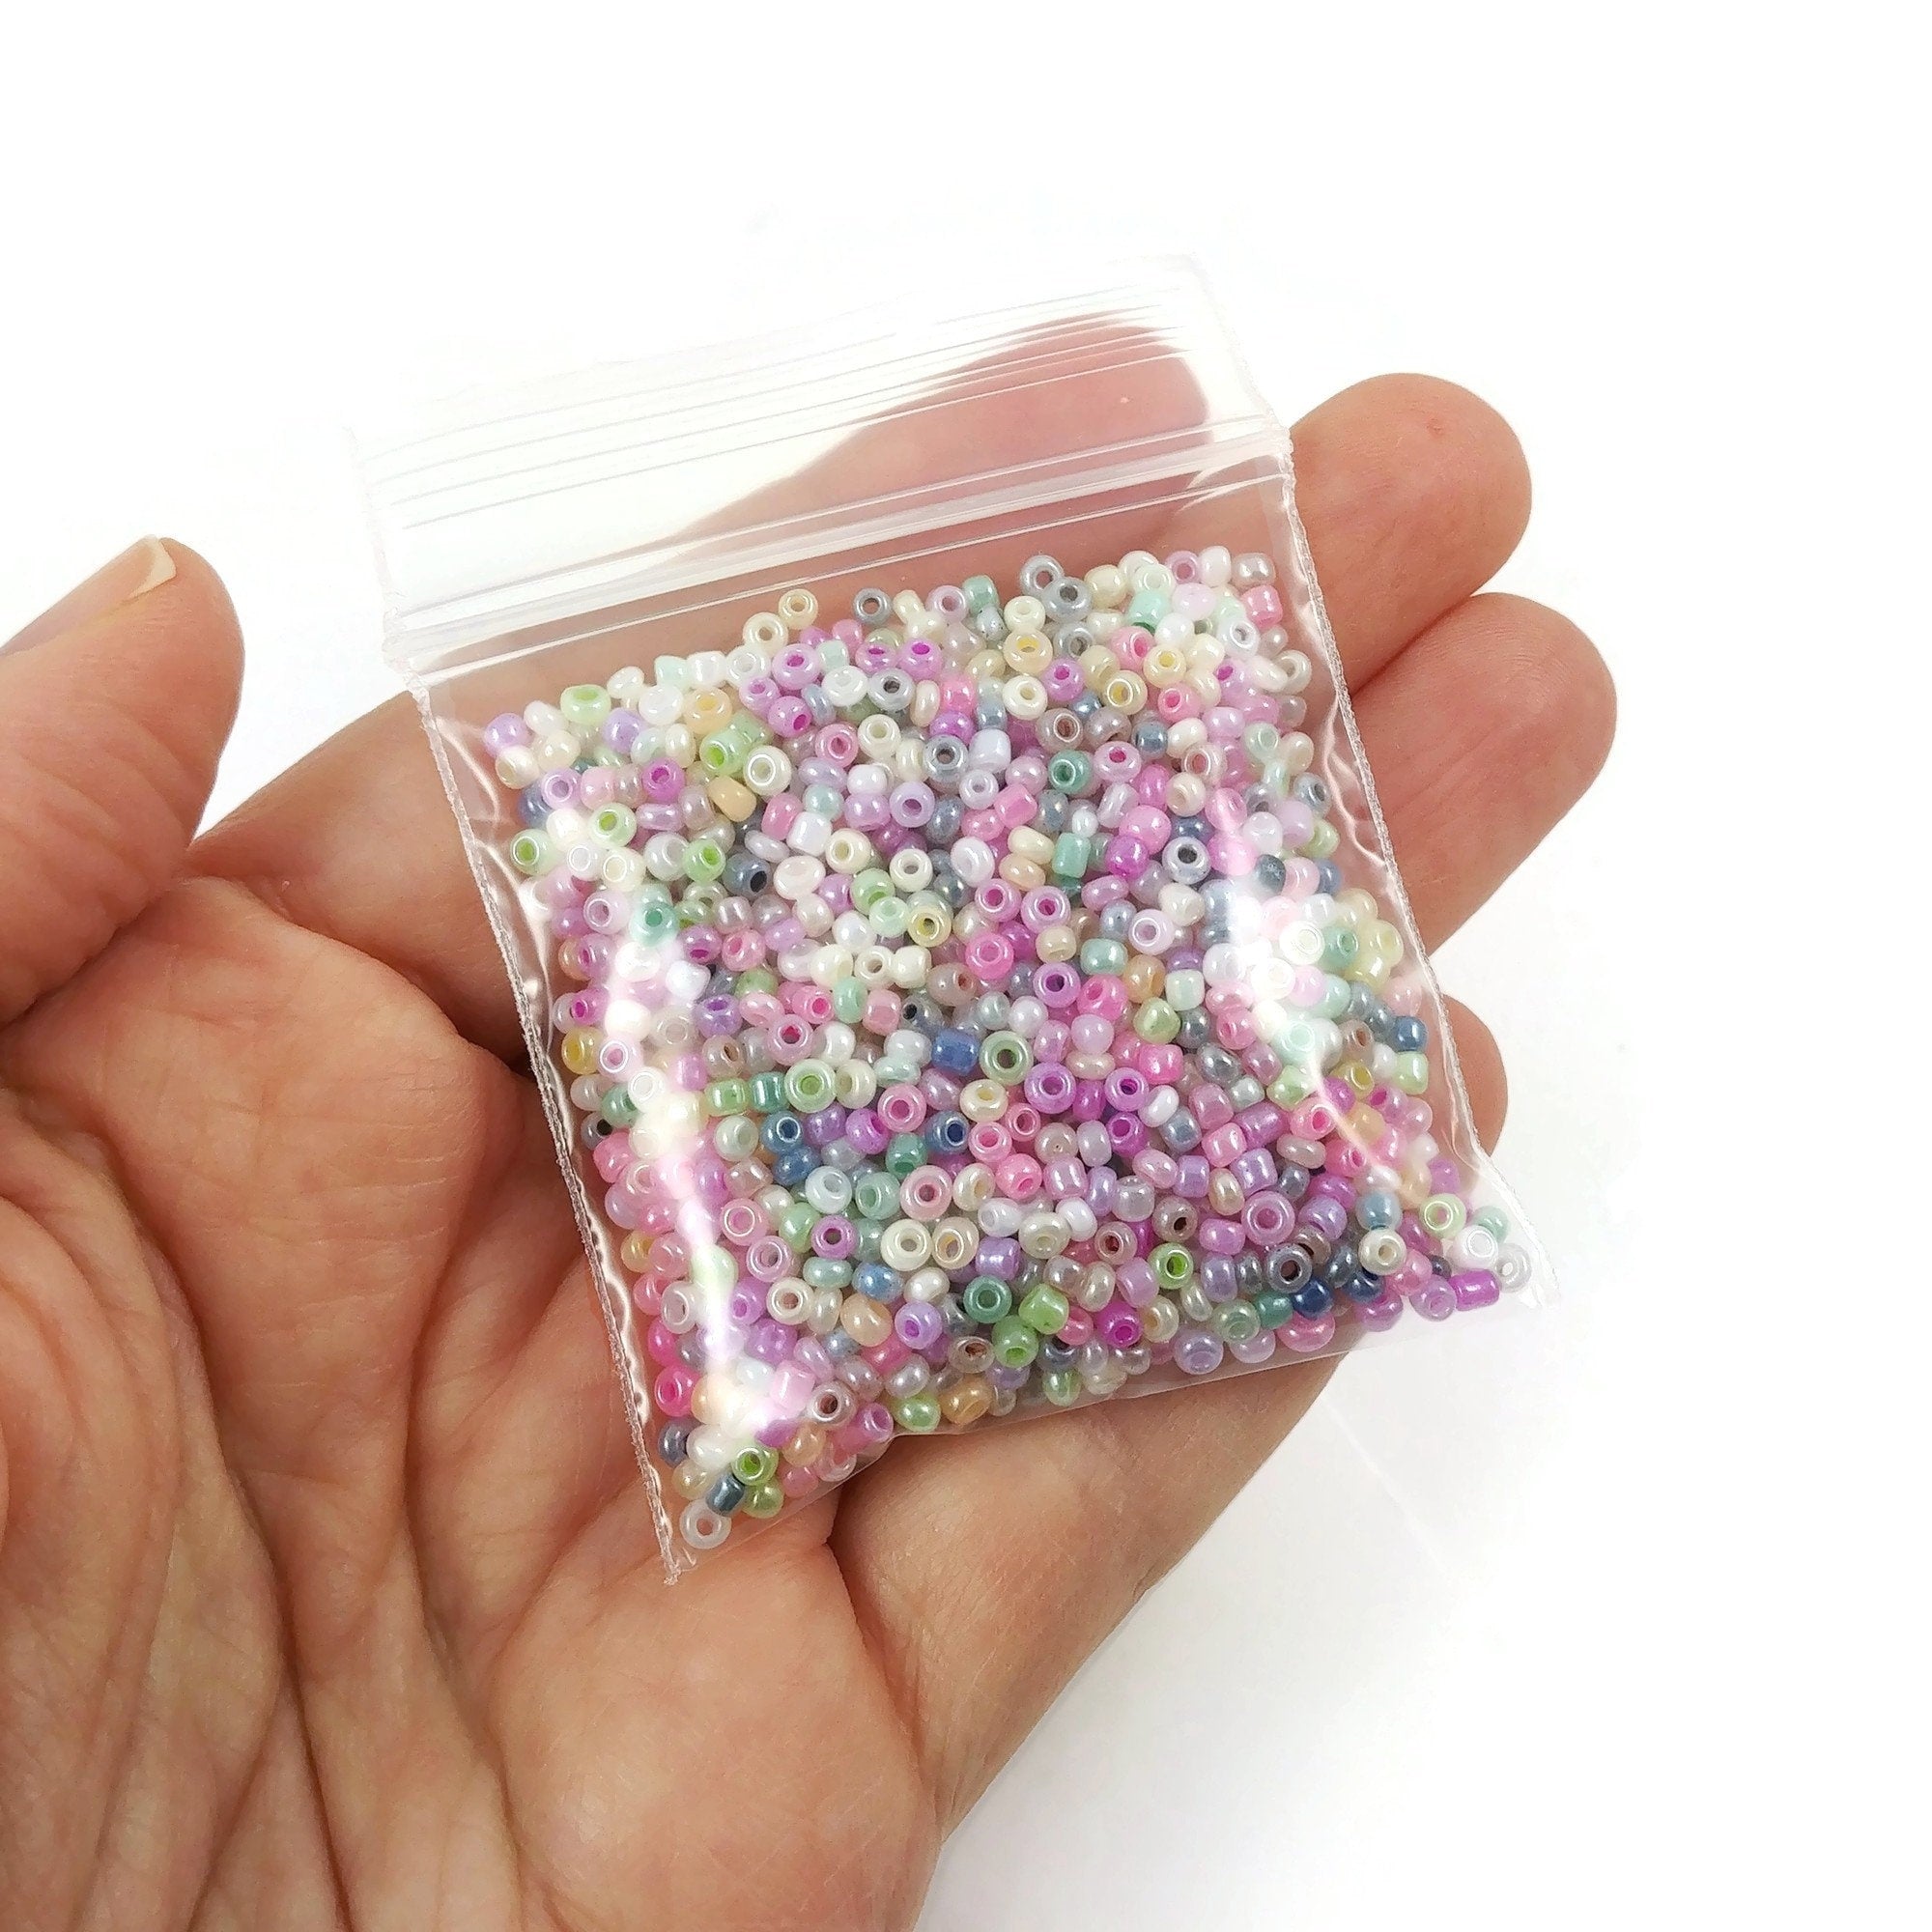 Mixed glass seed beads, Pastel rainbow assorted colors, 2mm 3mm 4mm, Bead soup grab bag